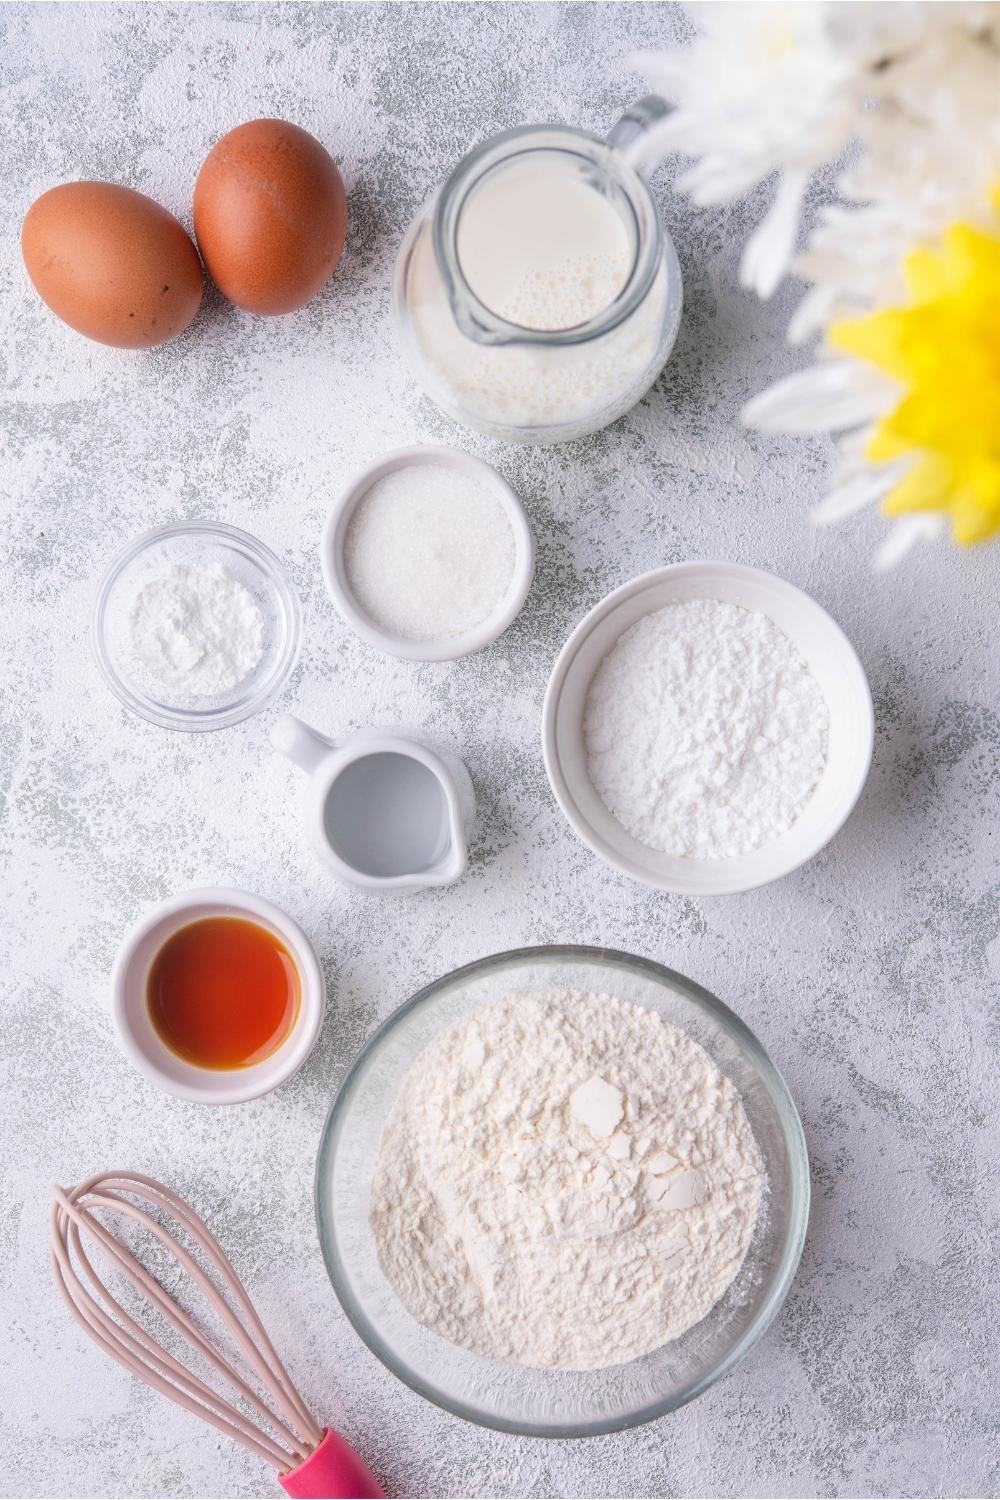 An assortment of ingredients for funnel cakes including flour, eggs, vanilla extract, and powdered sugar.